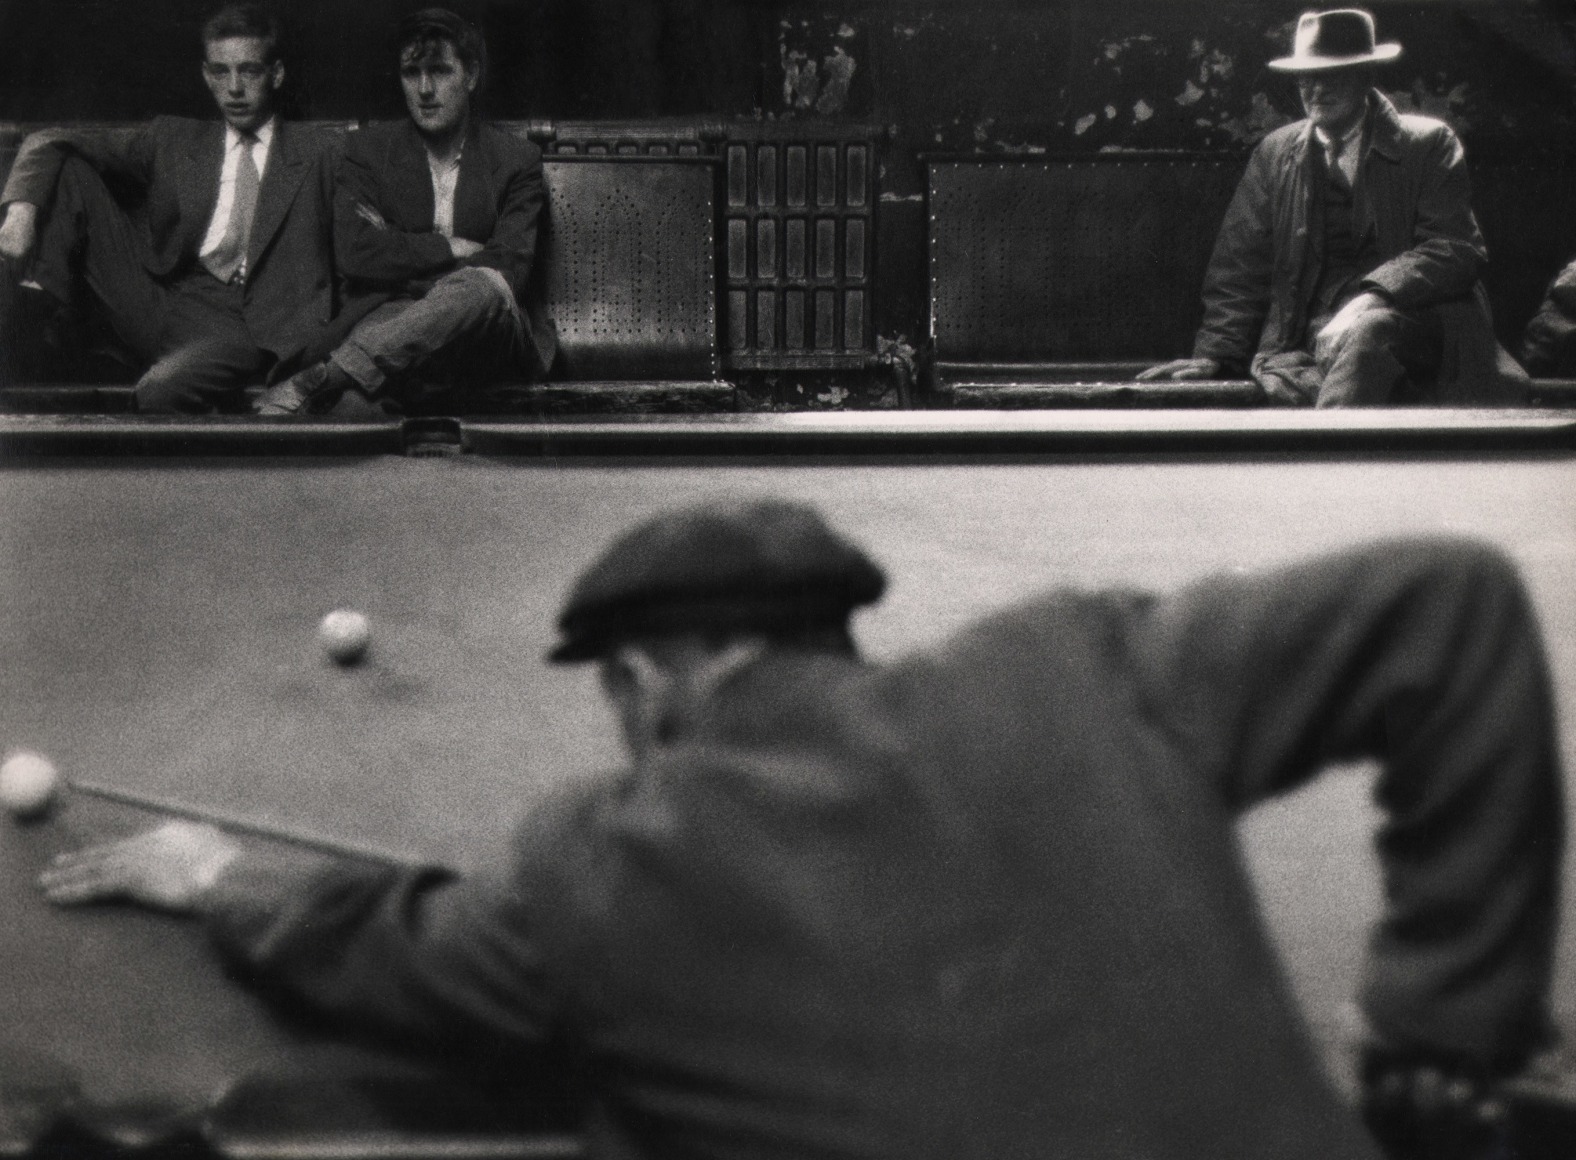 29. John Bulmer, The billiards room at Nelson, Lancashire, ​c. 1966. A man in the foreground is out of focus, back to the camera, leaning over the pool table. Three men watch on from benches in the background.